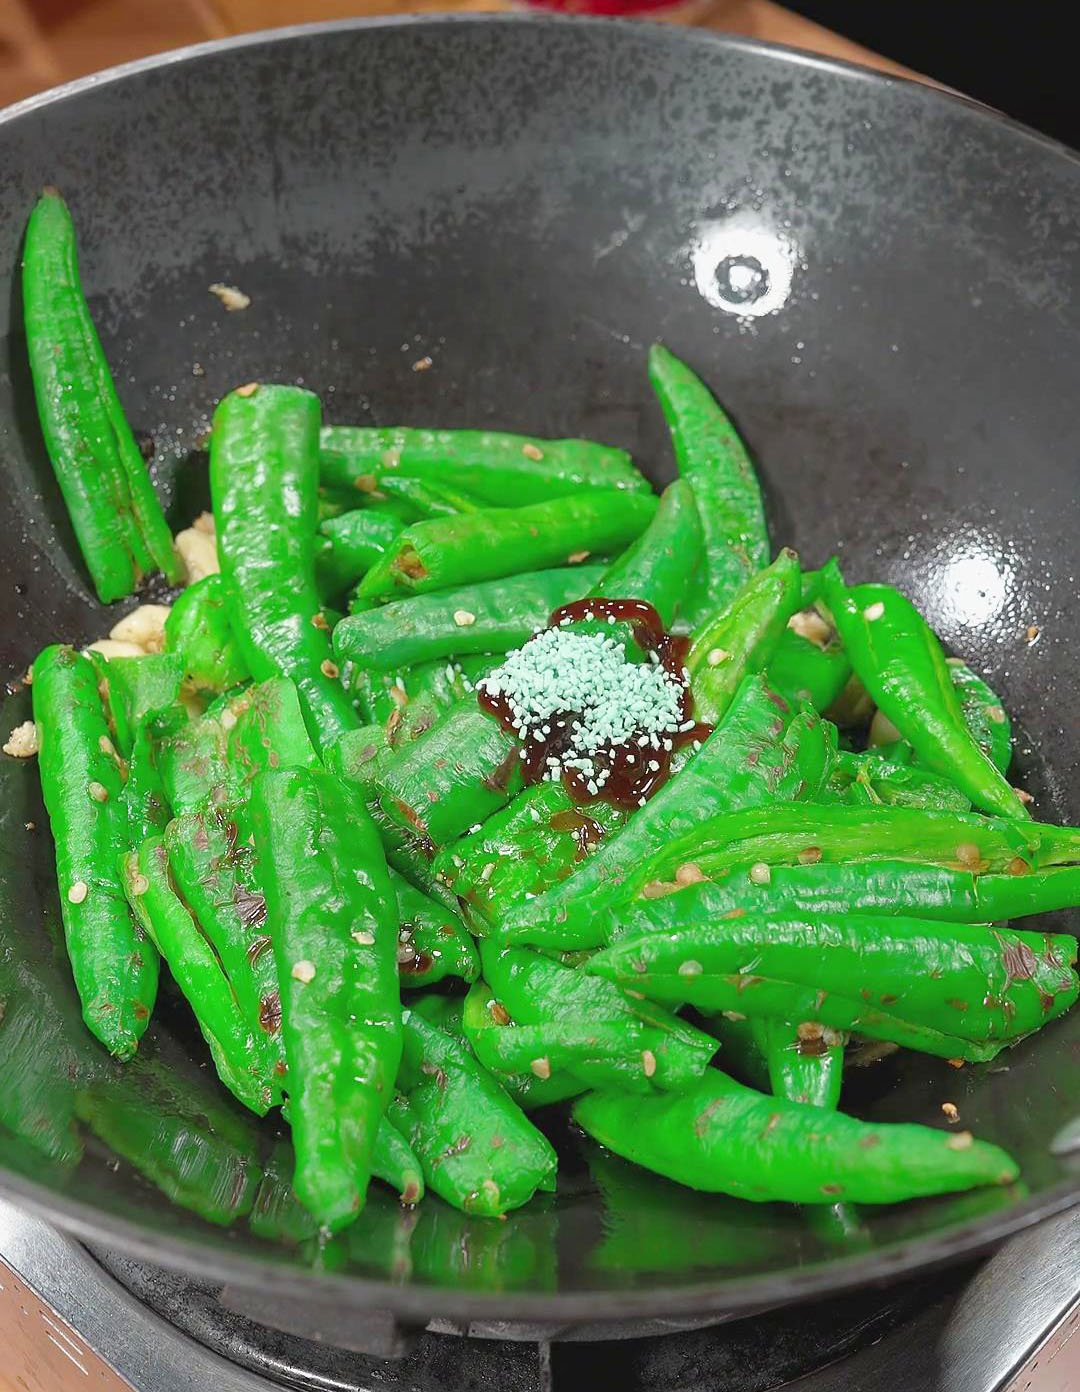 combine the charred green peppers and seasonings